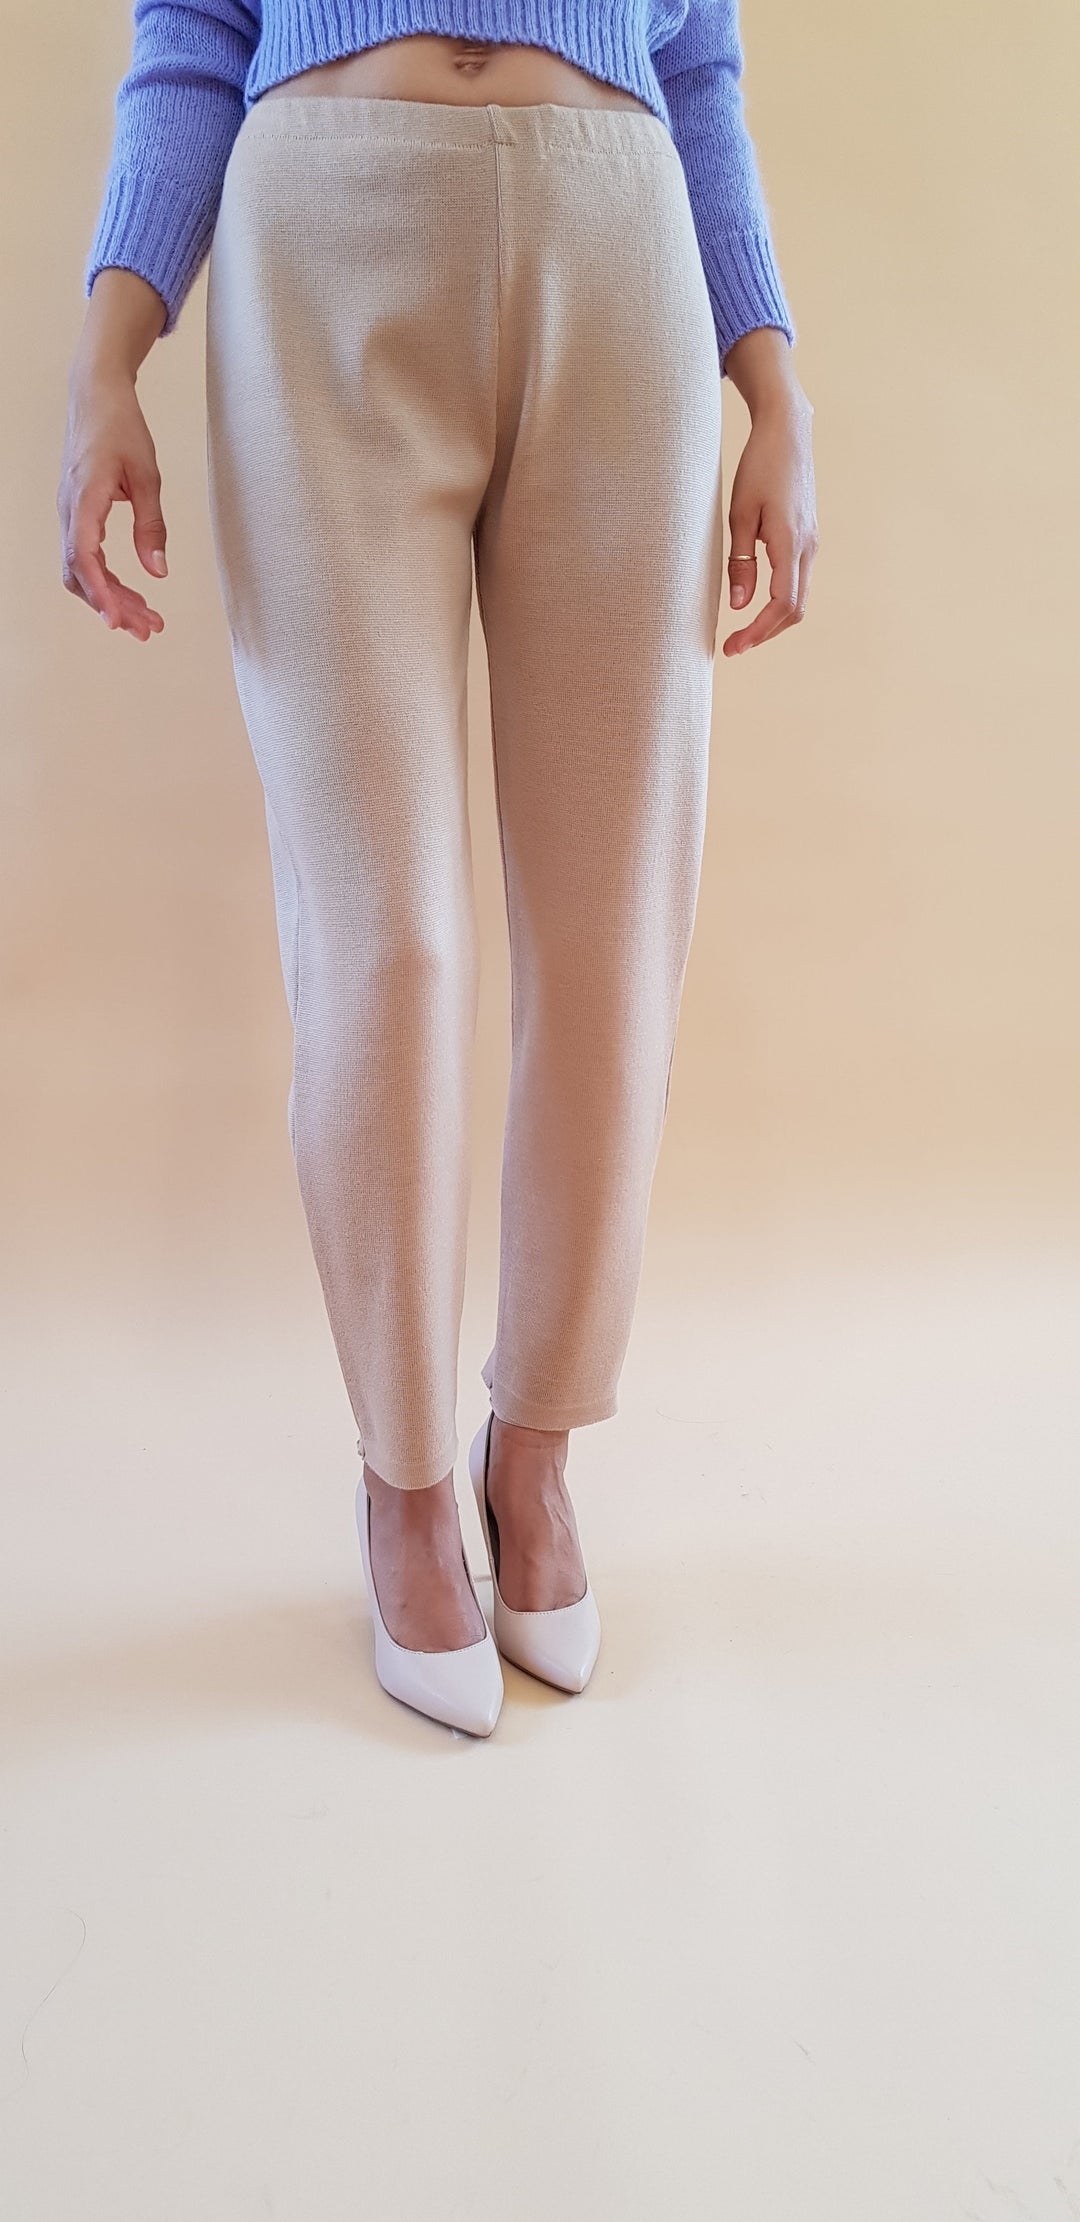 Person wearing beige pants and white shoes on a neutral background